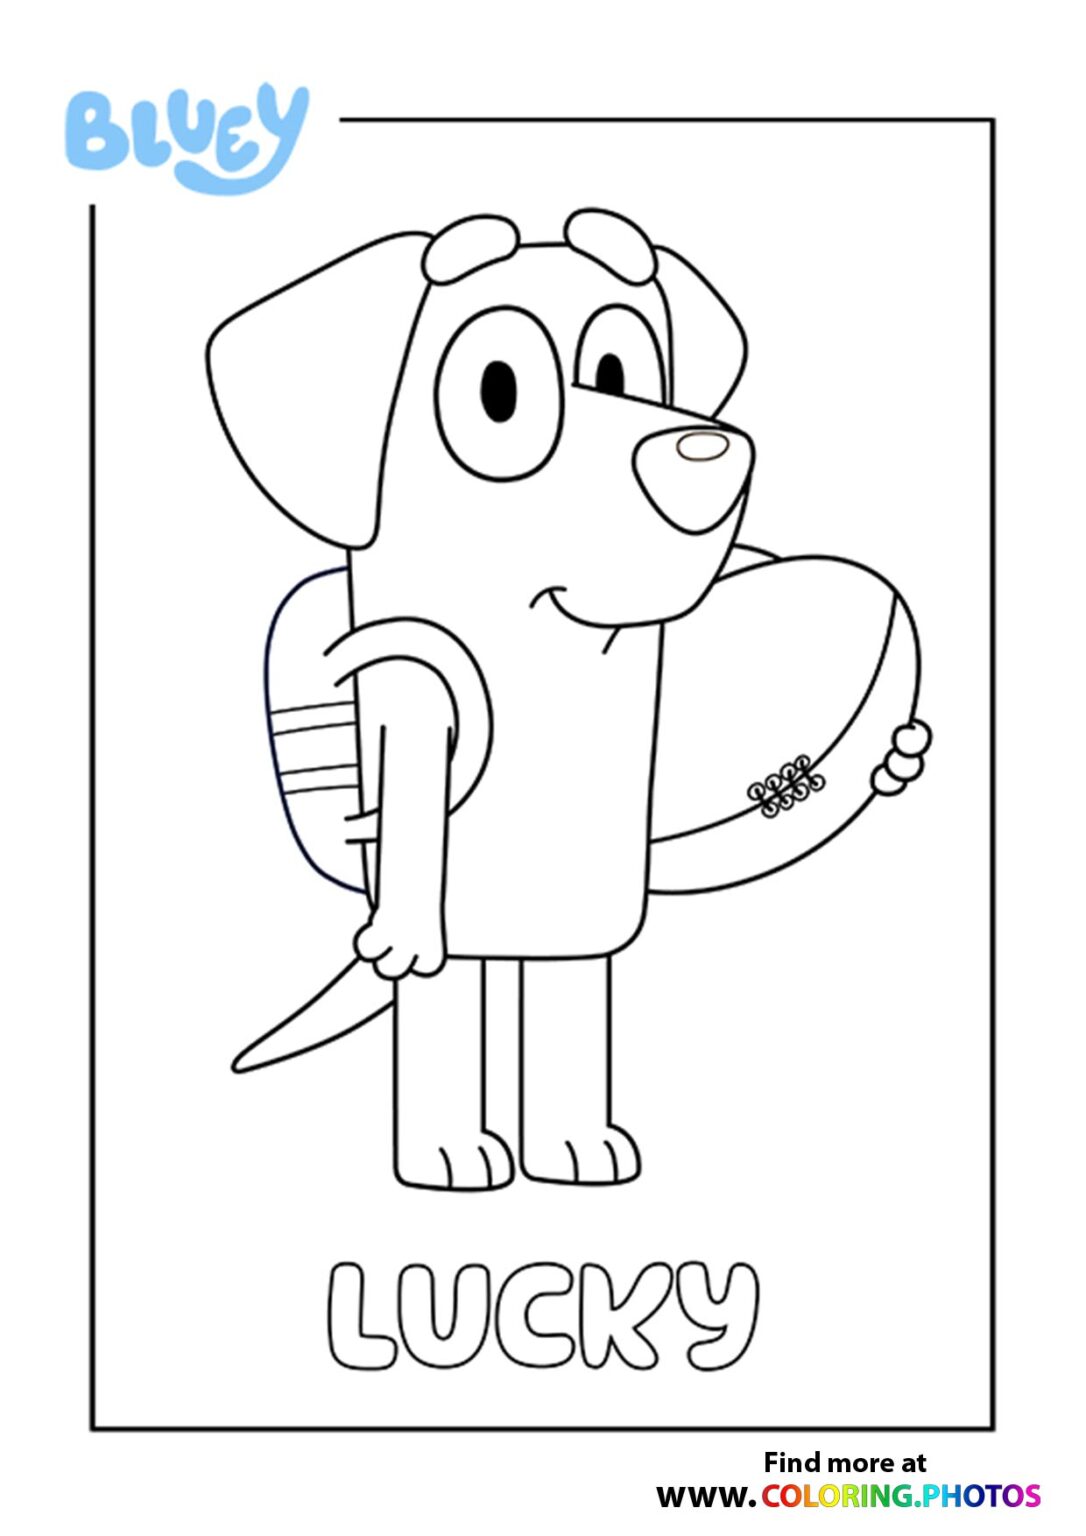 Bluey Coloring Pages for kids Free and easy print or download